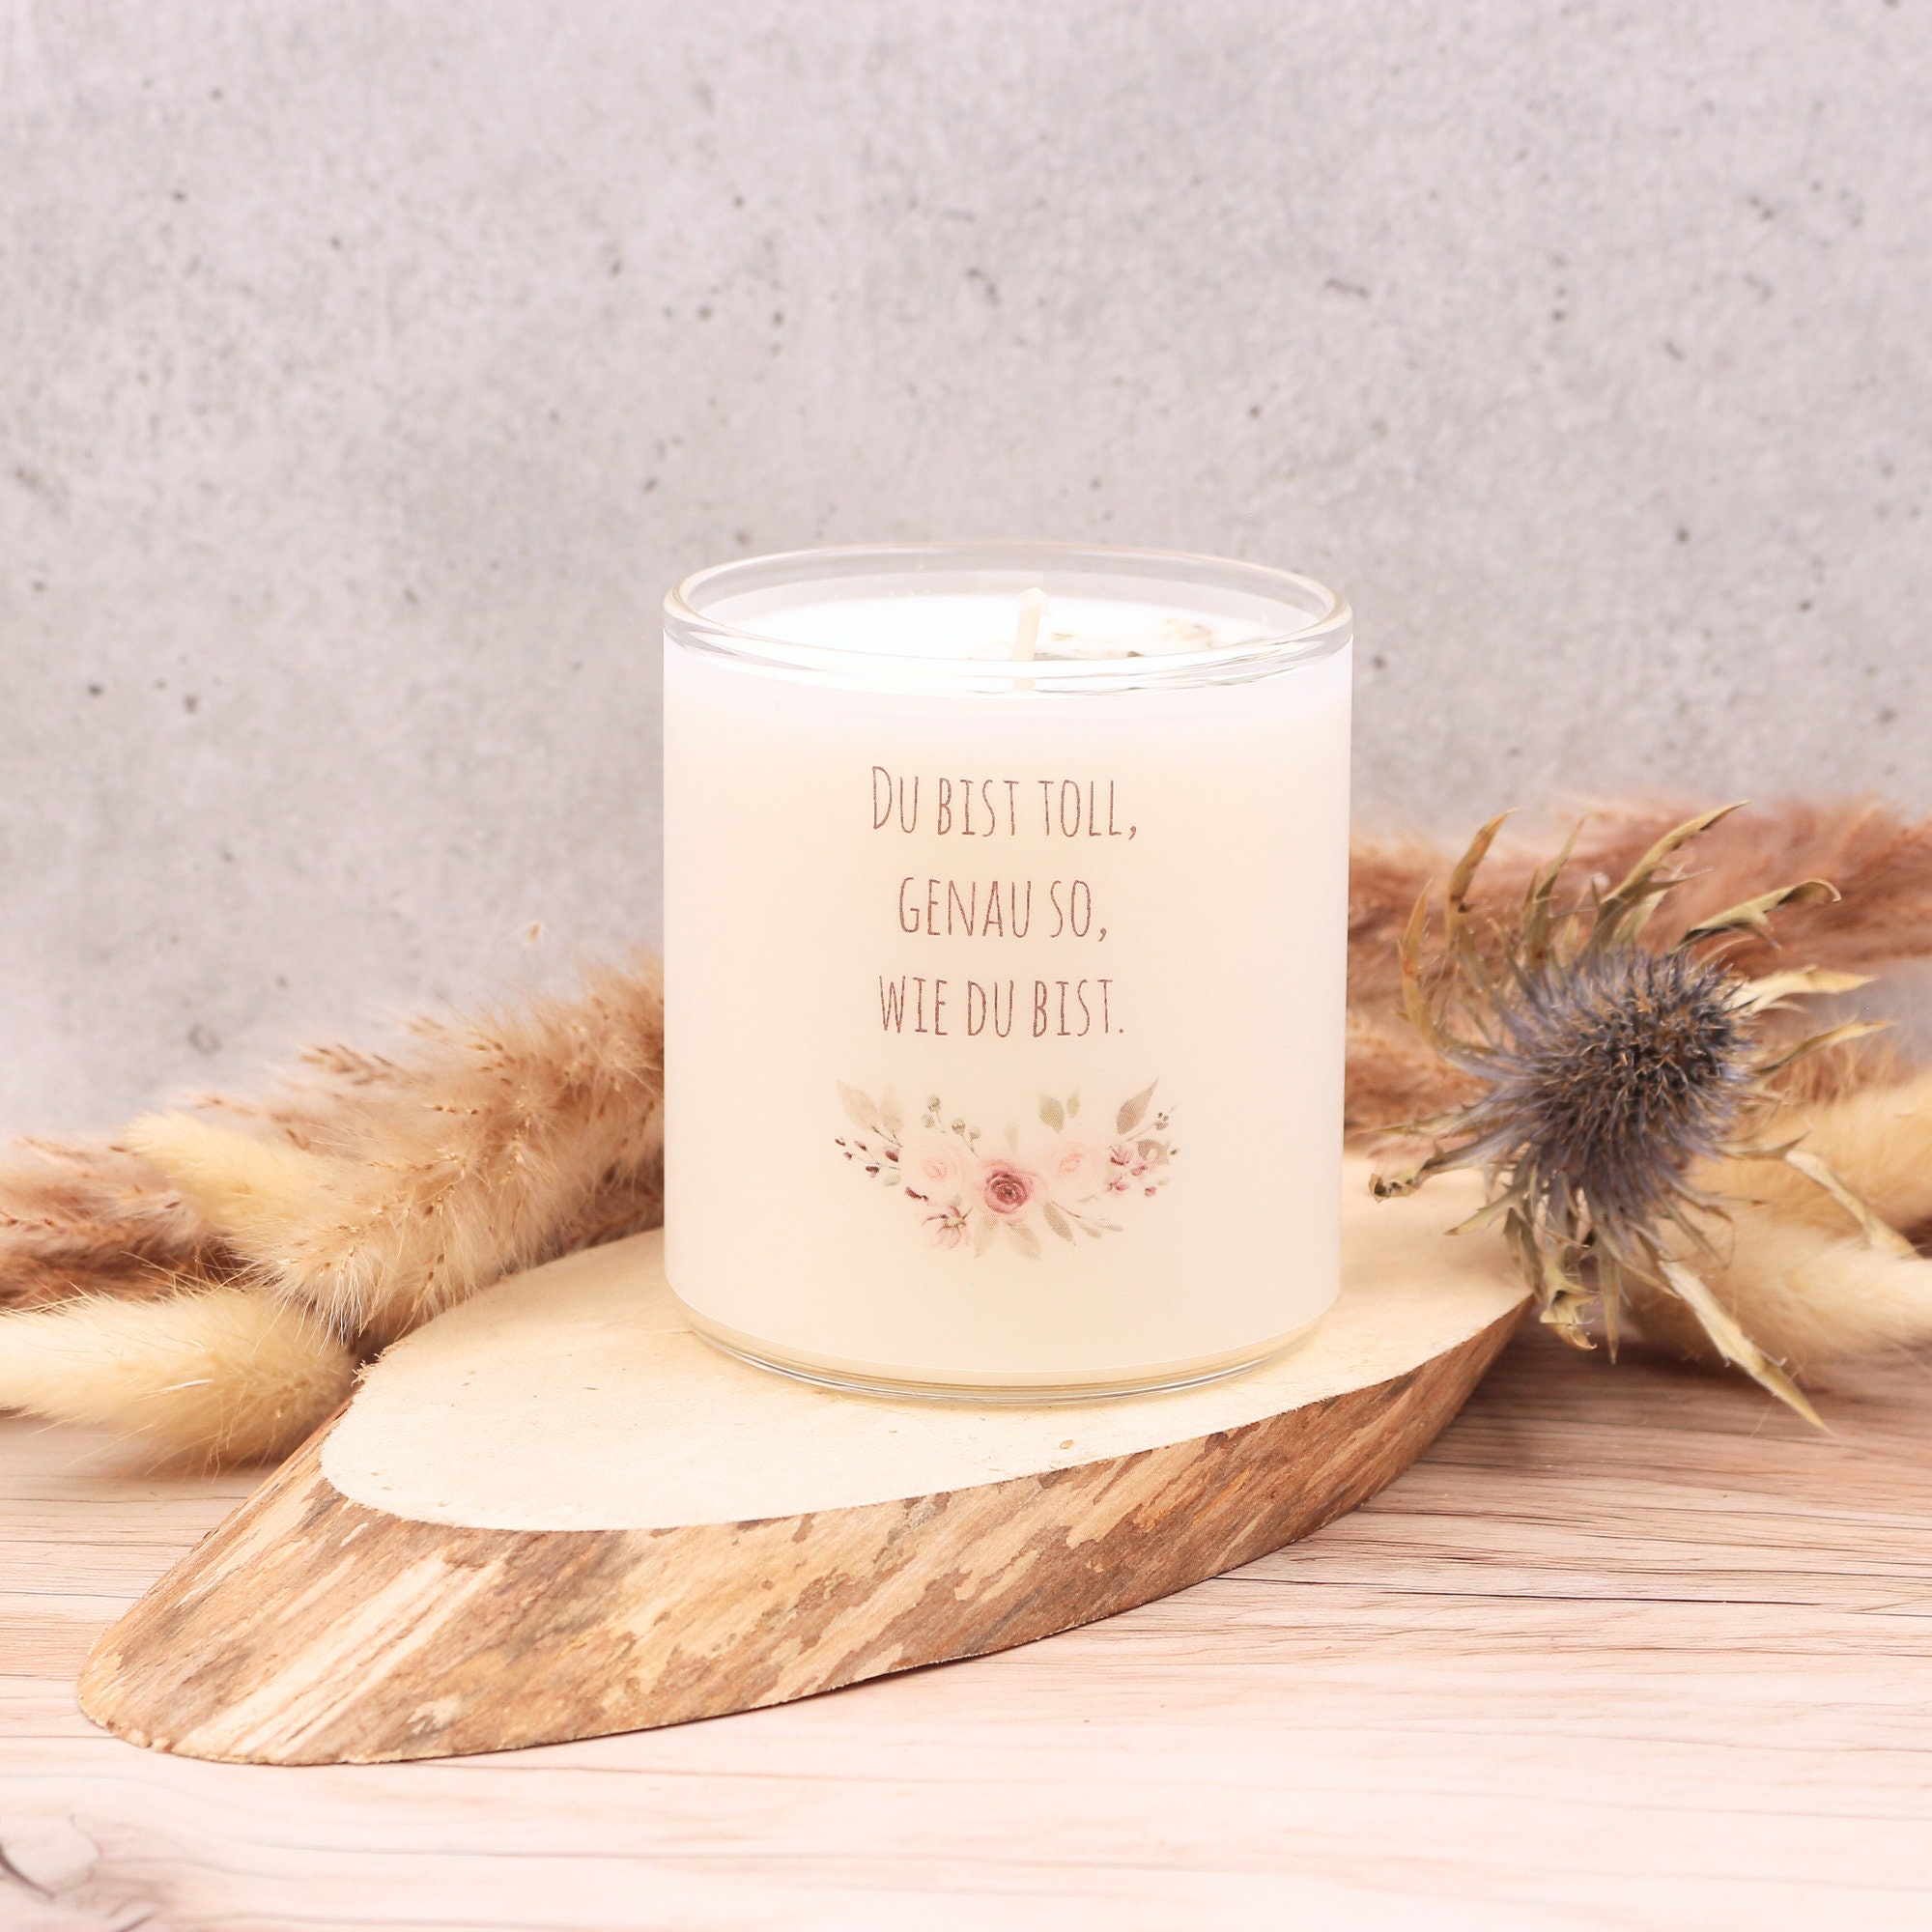 Scented Candle Spell Candle Motivational Candle in a Glass Ritual Candle as  a Small Gift for Feel-good Gifts Gift Daughter Mother's Day 